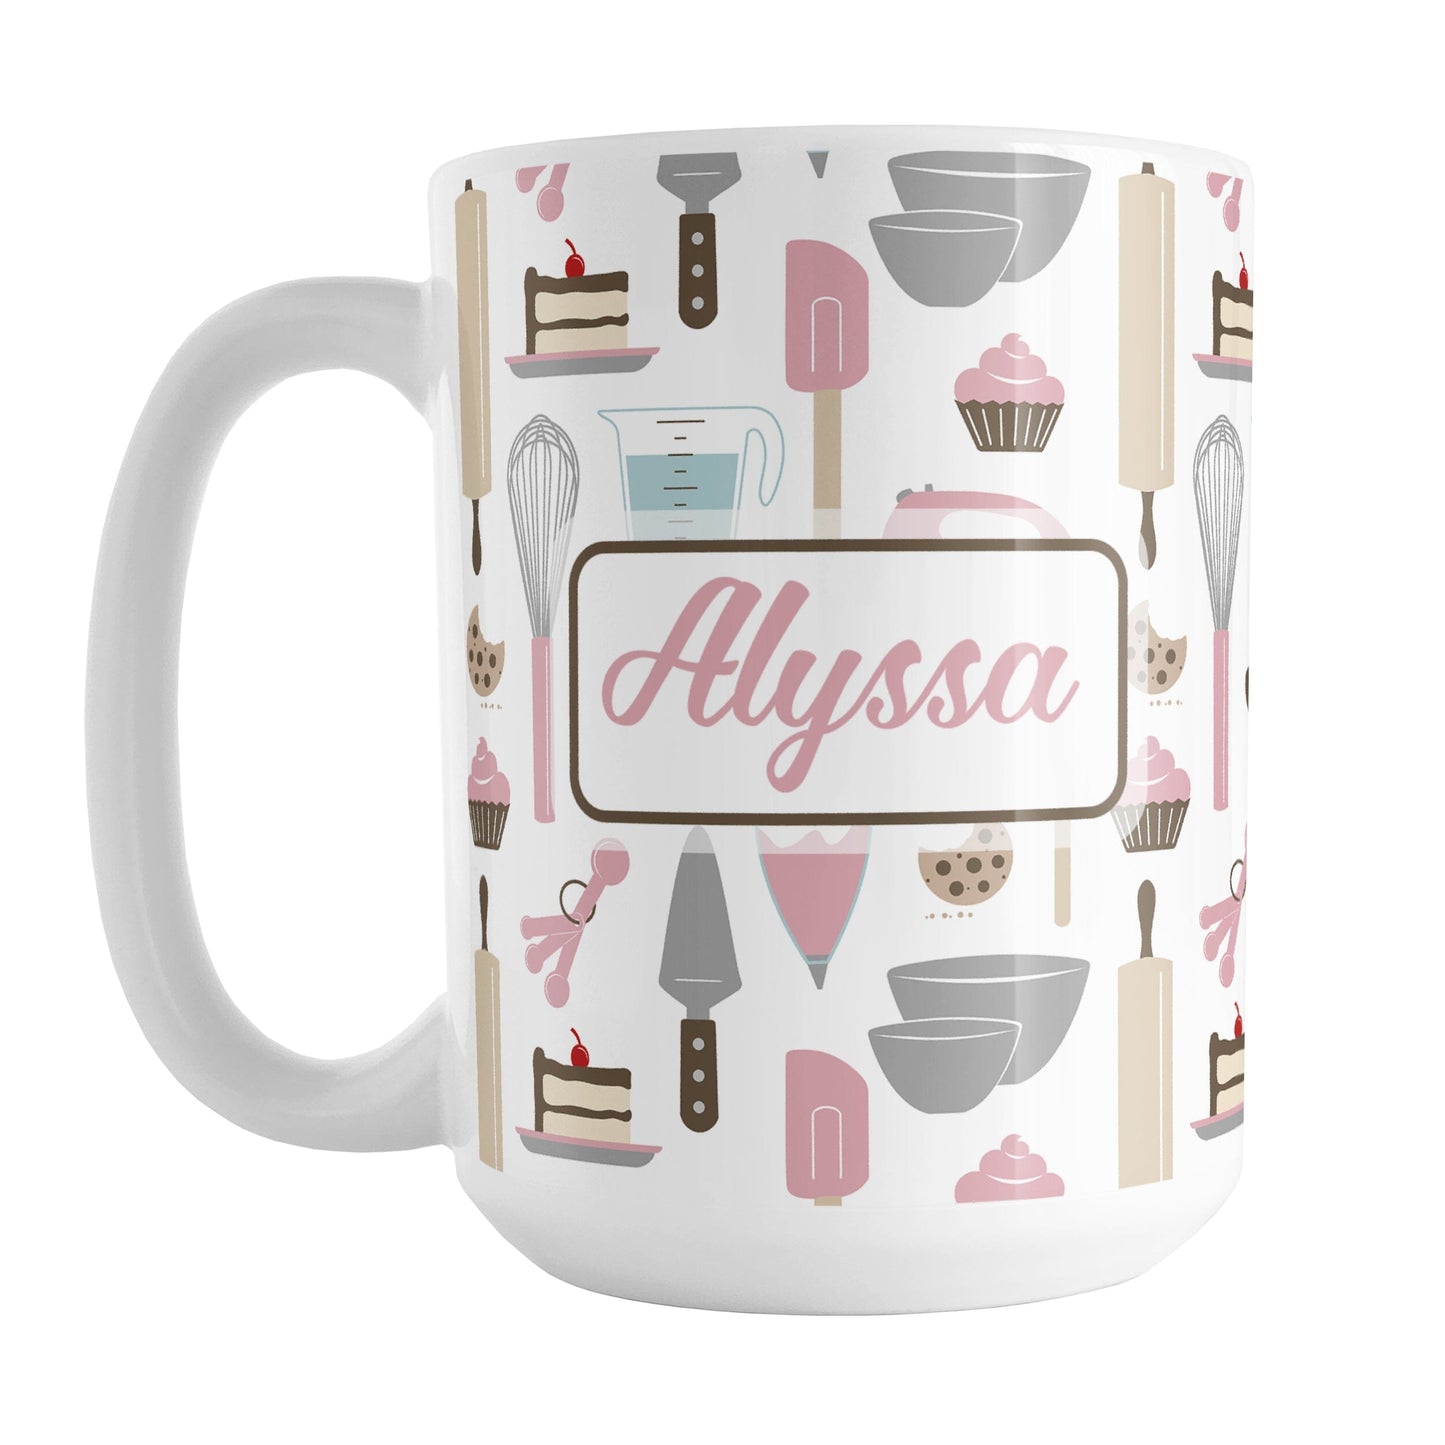 Personalized Pink Baking Pattern Mug (15oz) at Amy's Coffee Mugs. A ceramic coffee mug designed with a pattern of baking tools like spatulas, whisks, mixers, bowls, and spoons, with cookies, cupcakes, and cake all in a pink, gray, brown, and beige color scheme that wraps around the mug. Your name is printed in a pink script font on both sides of the mug over the cute baking pattern.